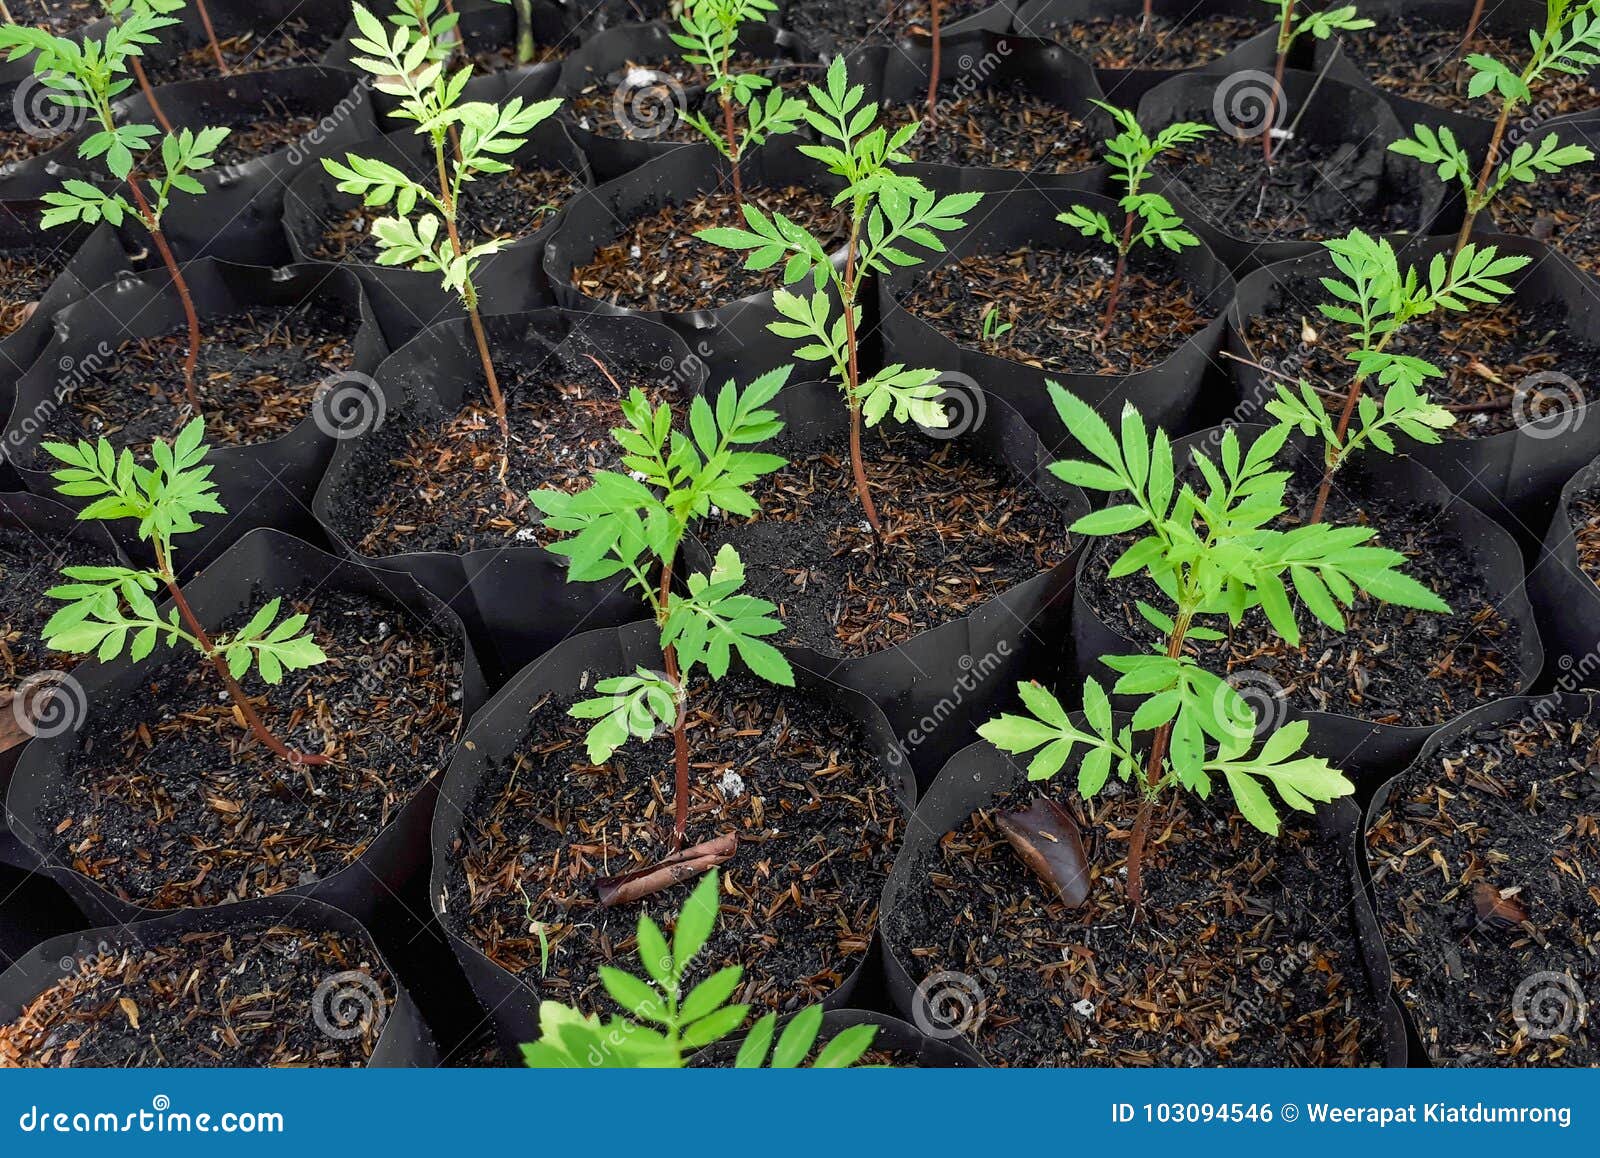 Young Green Plants In Black Plastic Bags Stock Photo Image Of Nursery Care 103094546